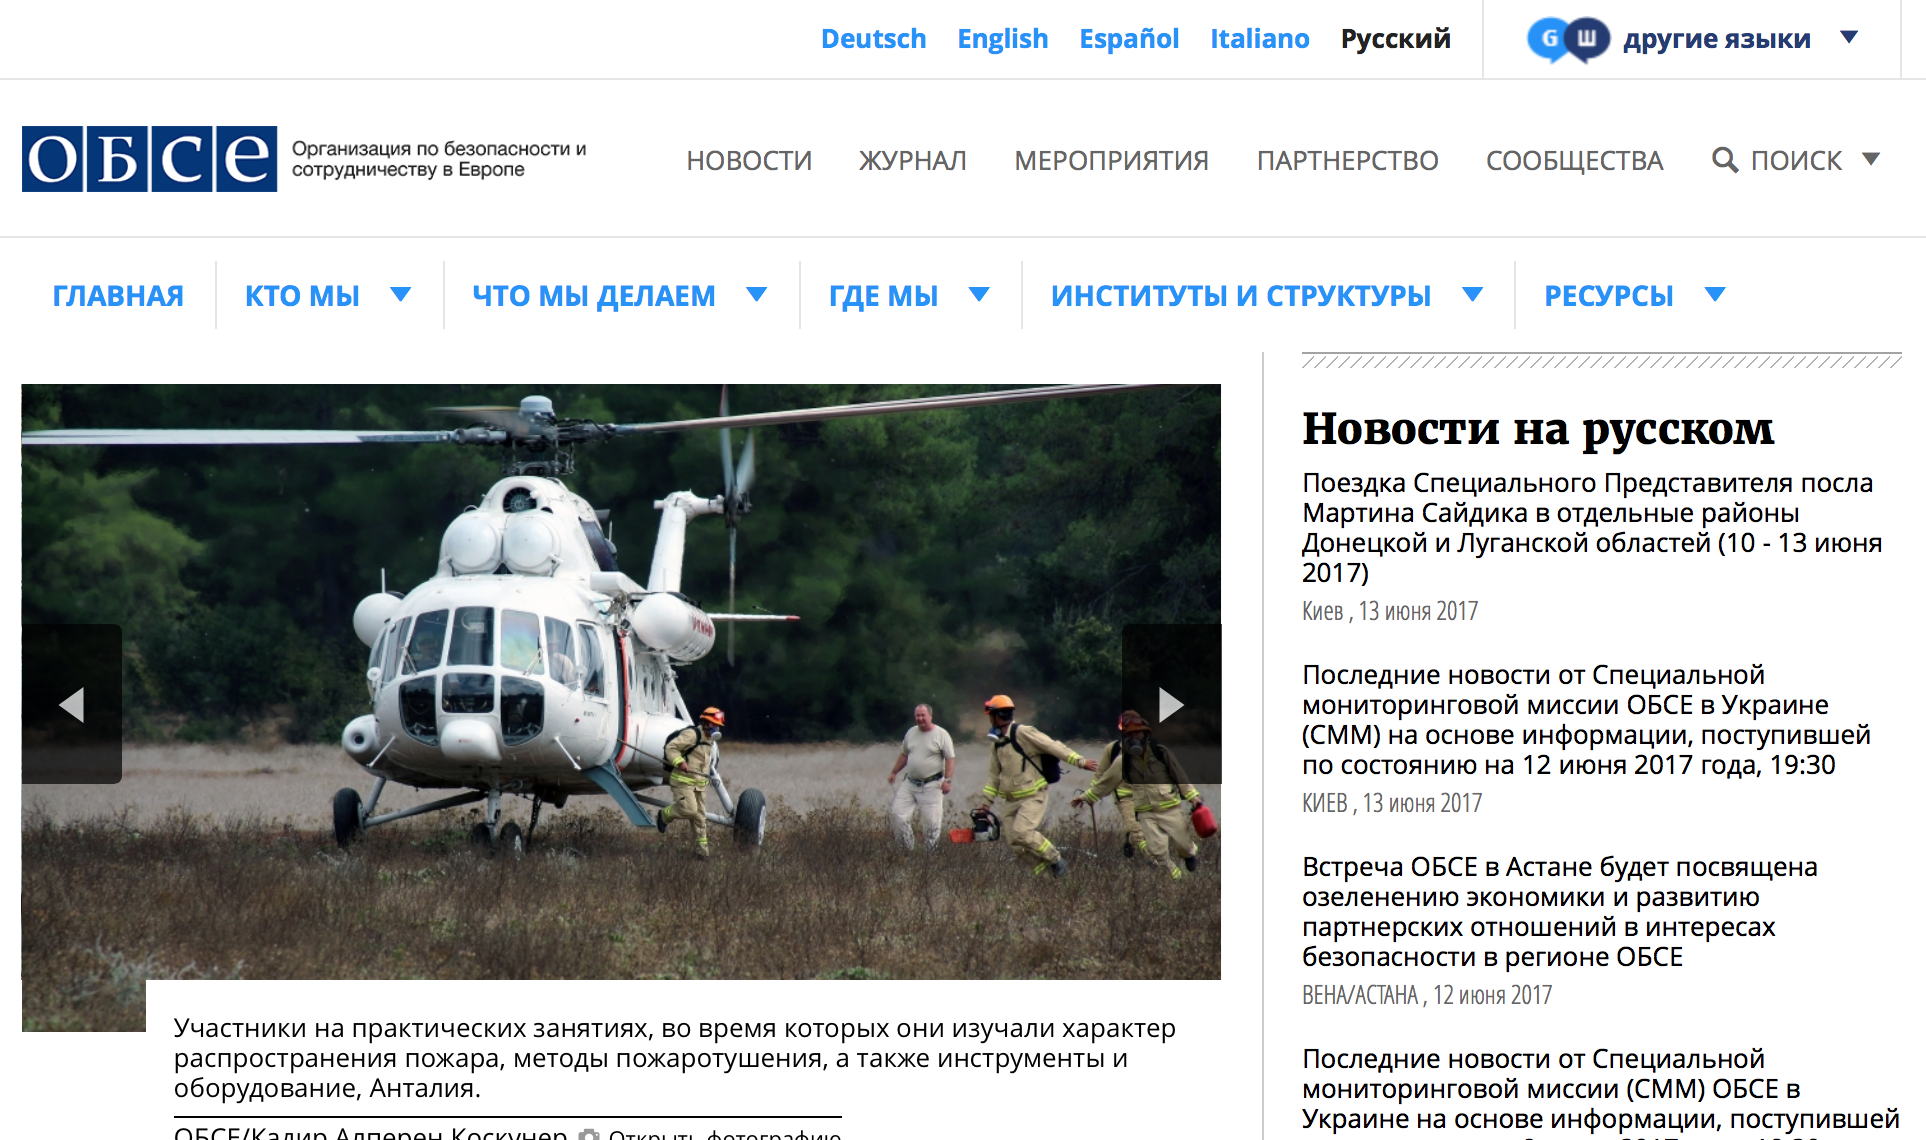 OSCE fully translated into Russian website